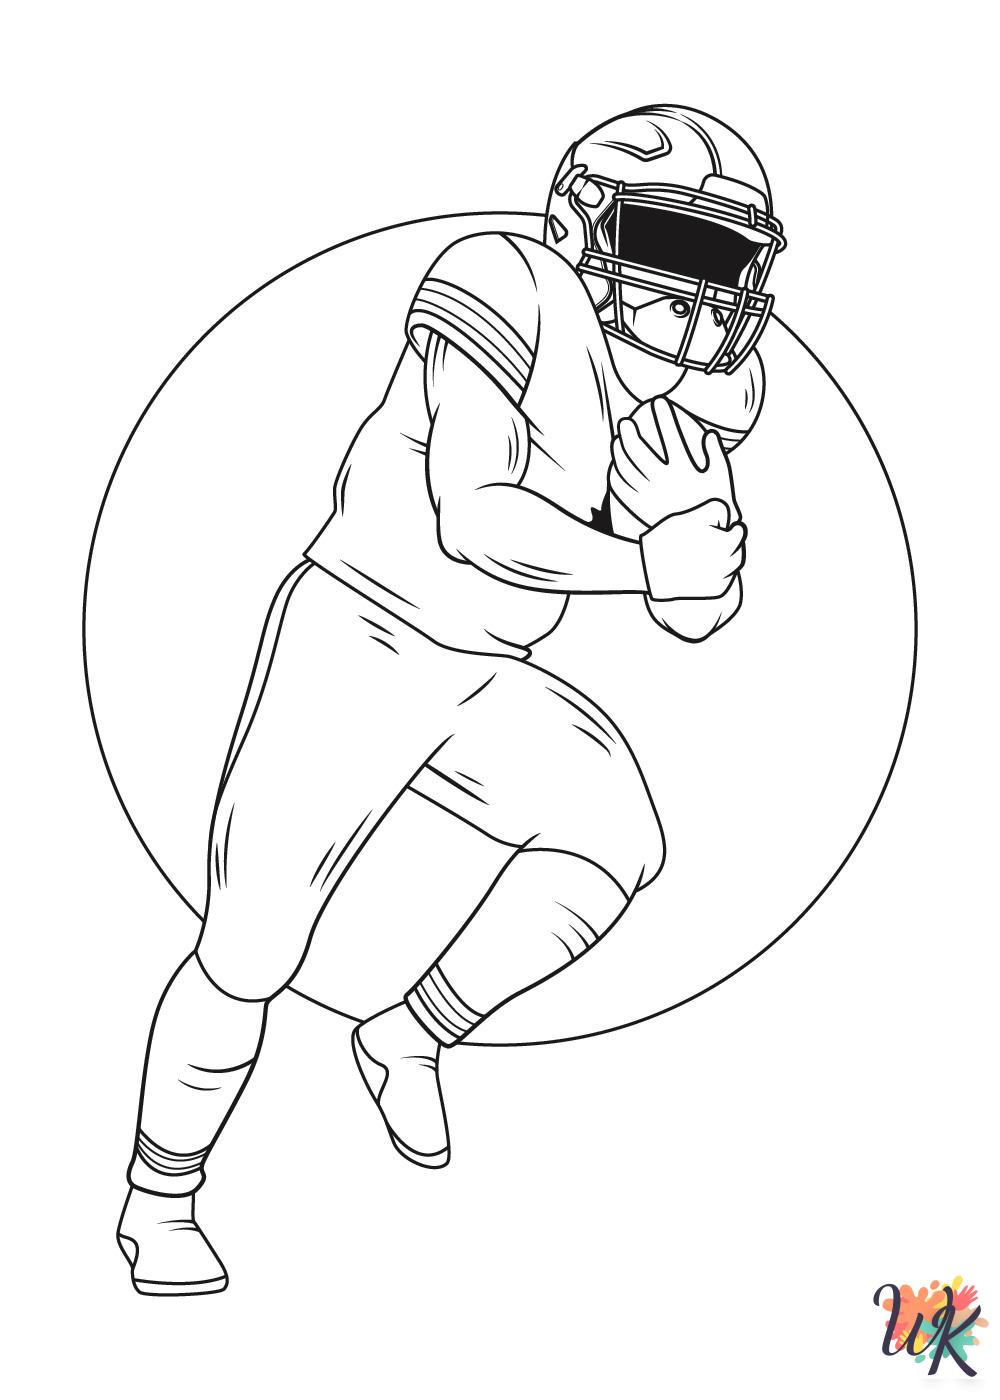 coloring pages NFL